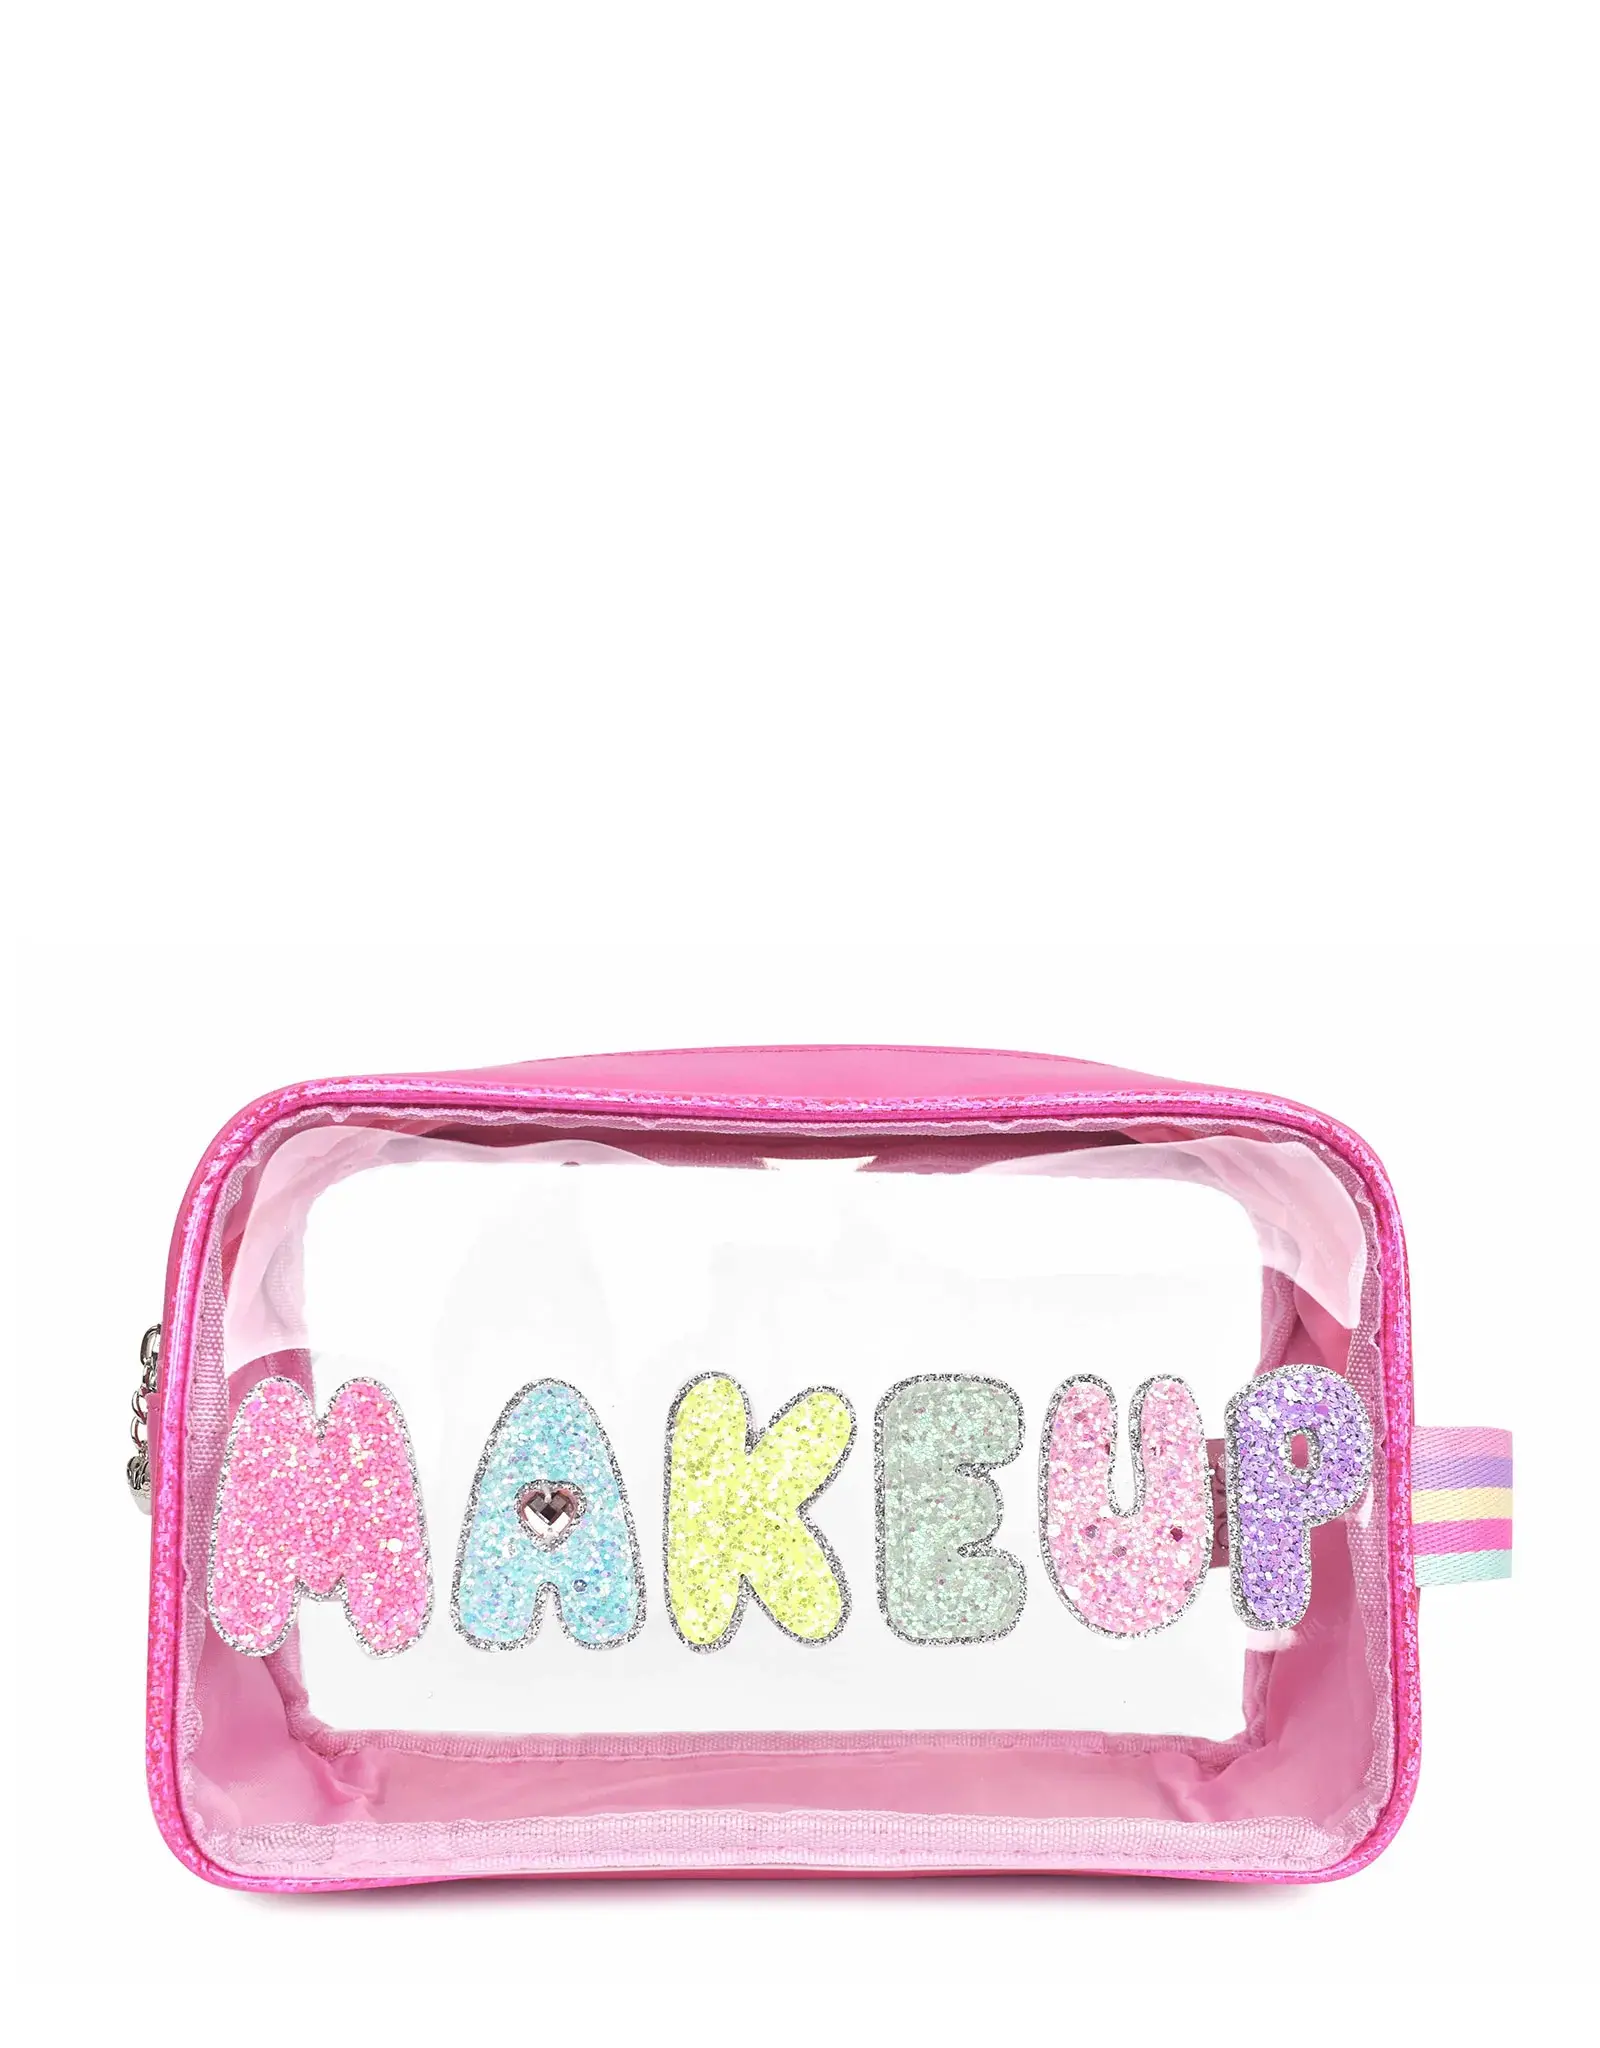 OMG Accessories Flamingo MAKEUP Rainbow Clear Pouch